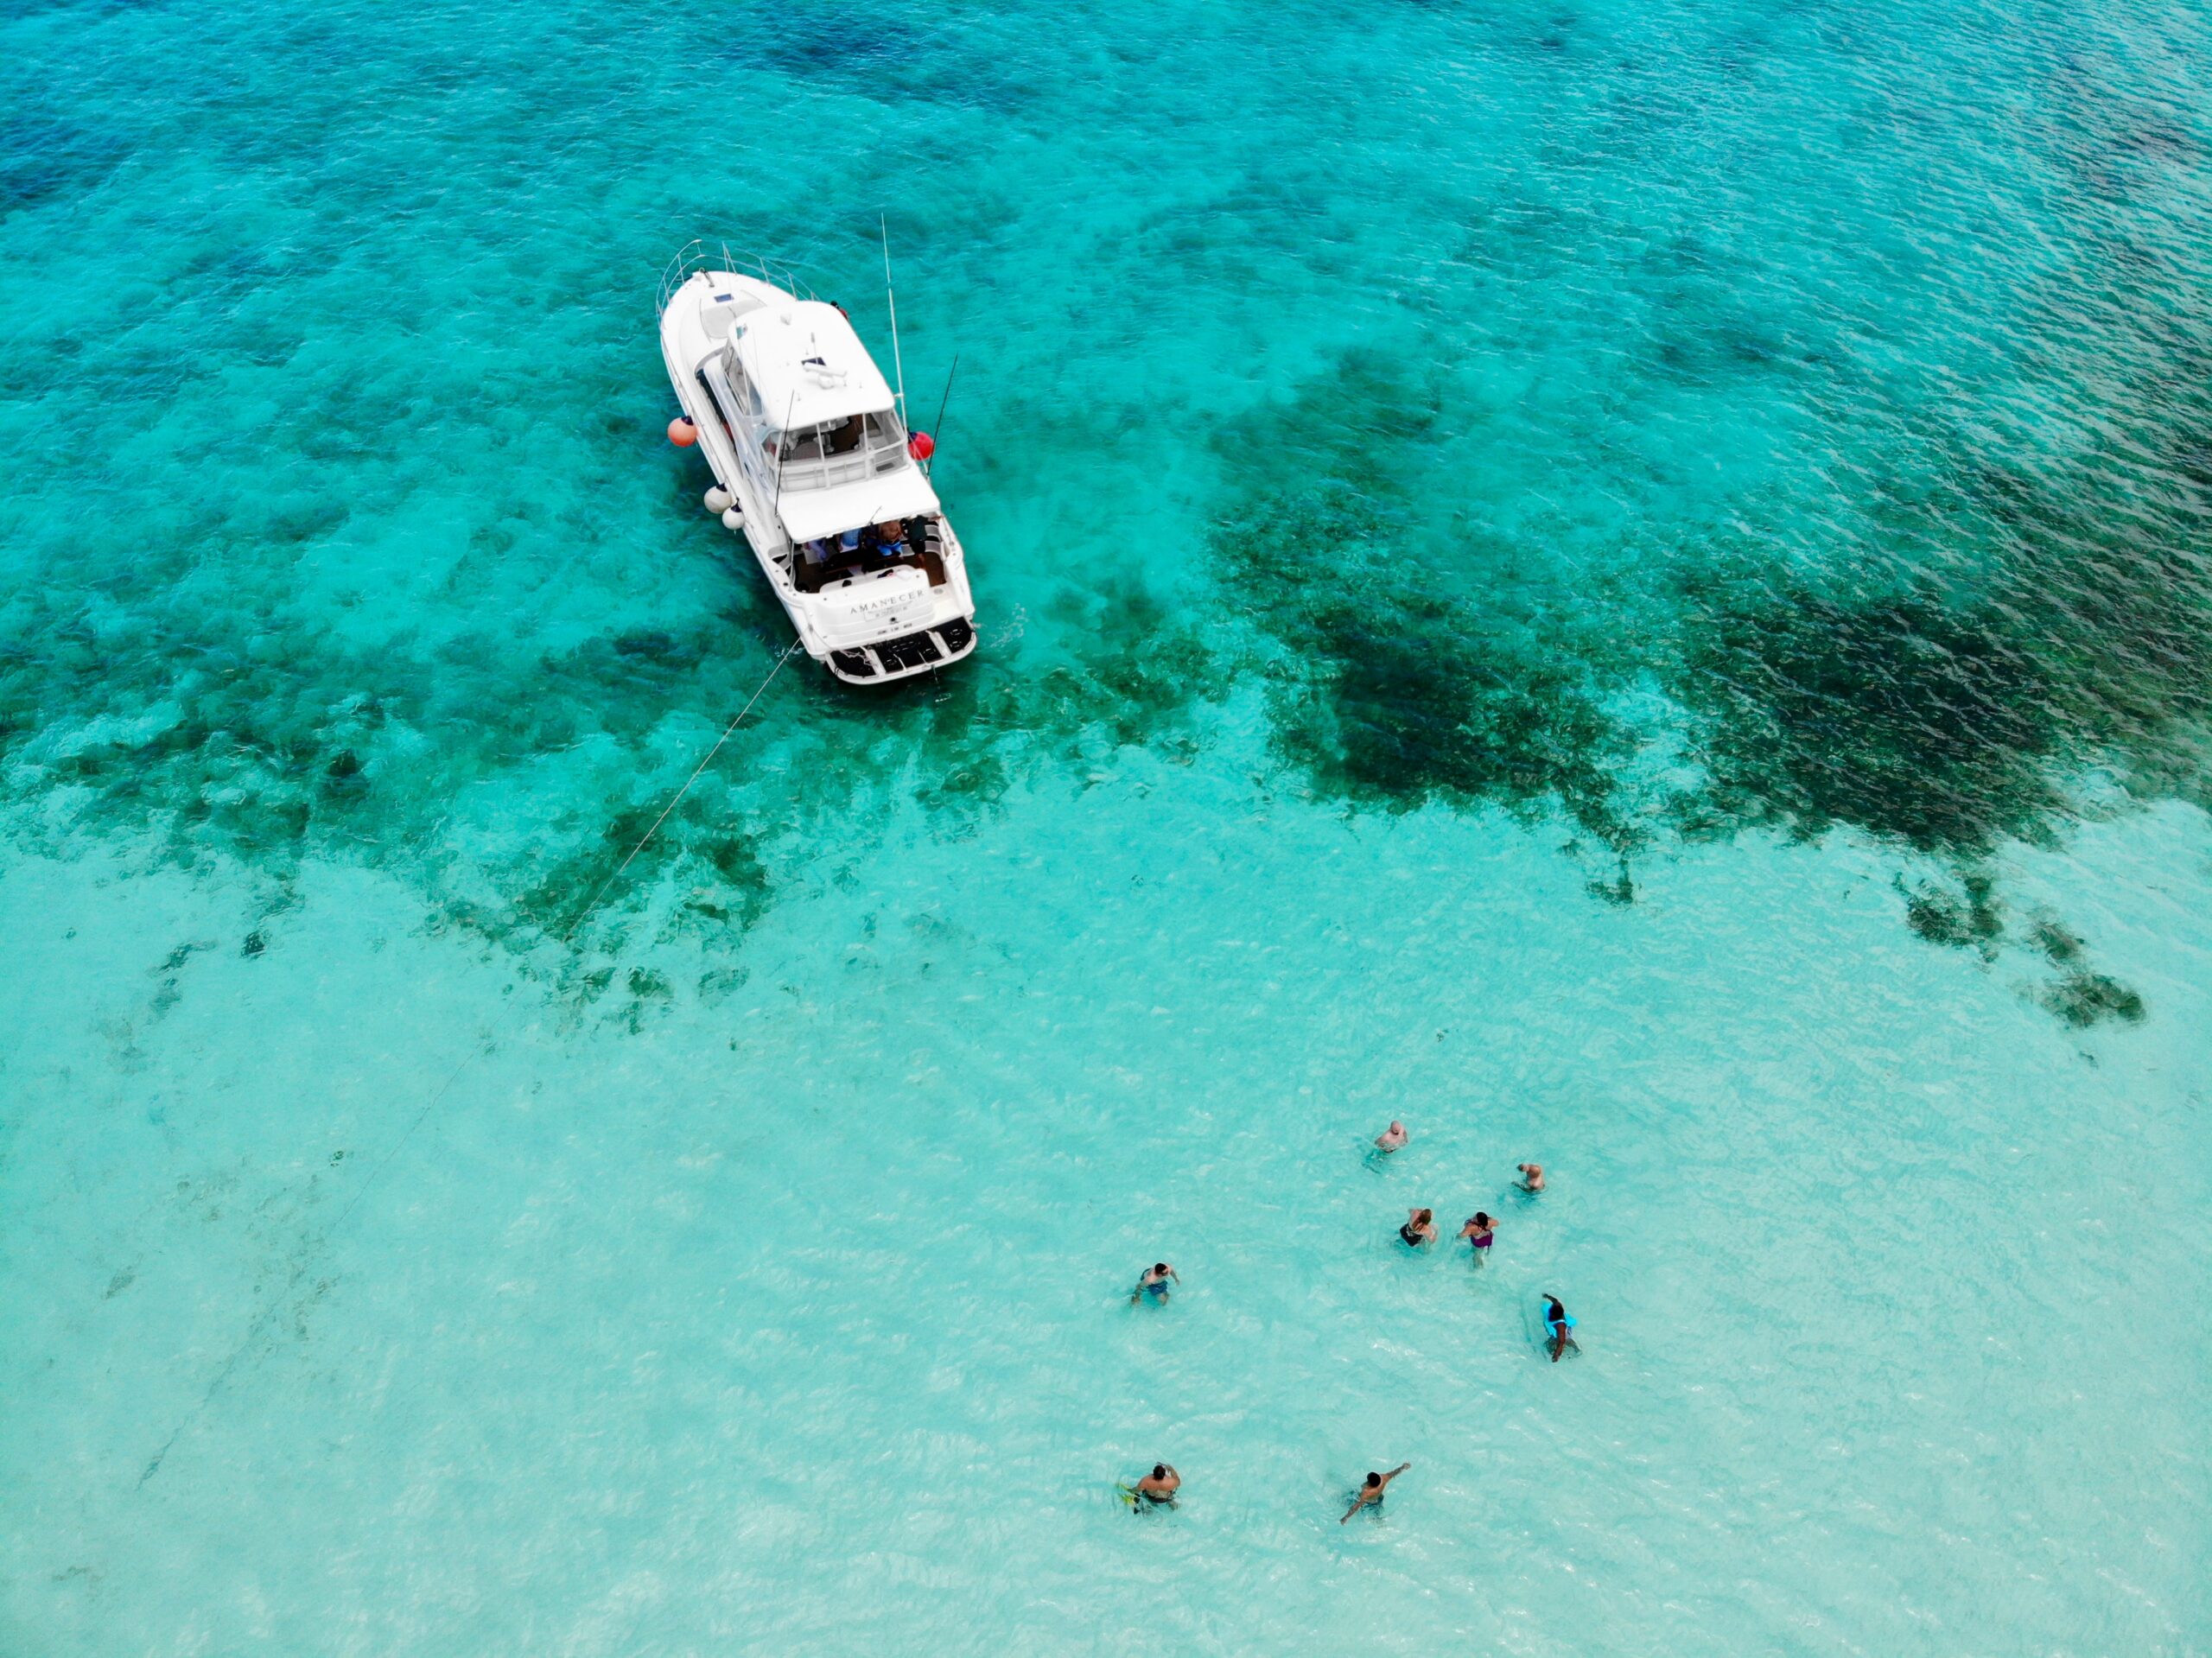 Learn more about the safety of tourists in Cozumel, Mexico. 
pictured: Cozumel, Mexico's beach with tourists enjoying the turquoise waters near a boat 